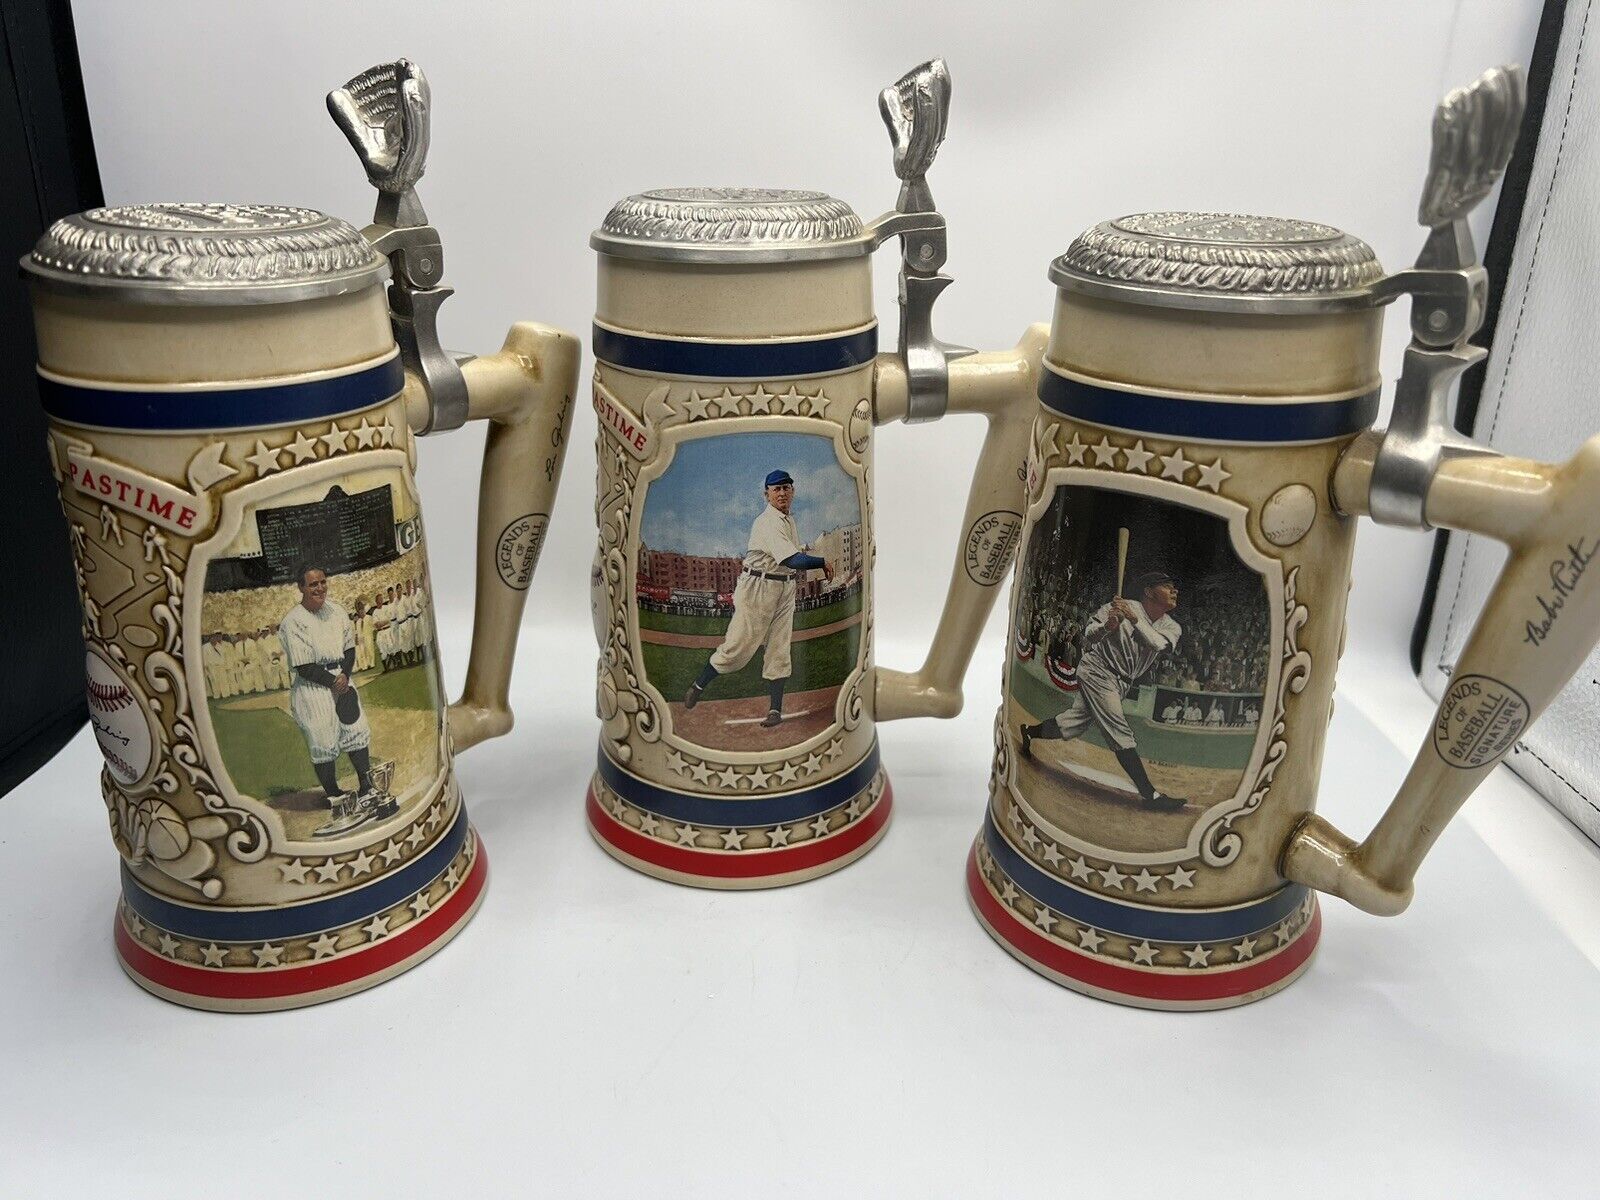 Babe Ruth Stein Legends Of Baseball Tankard Bradford Museum Cy Young Lou Gehrig